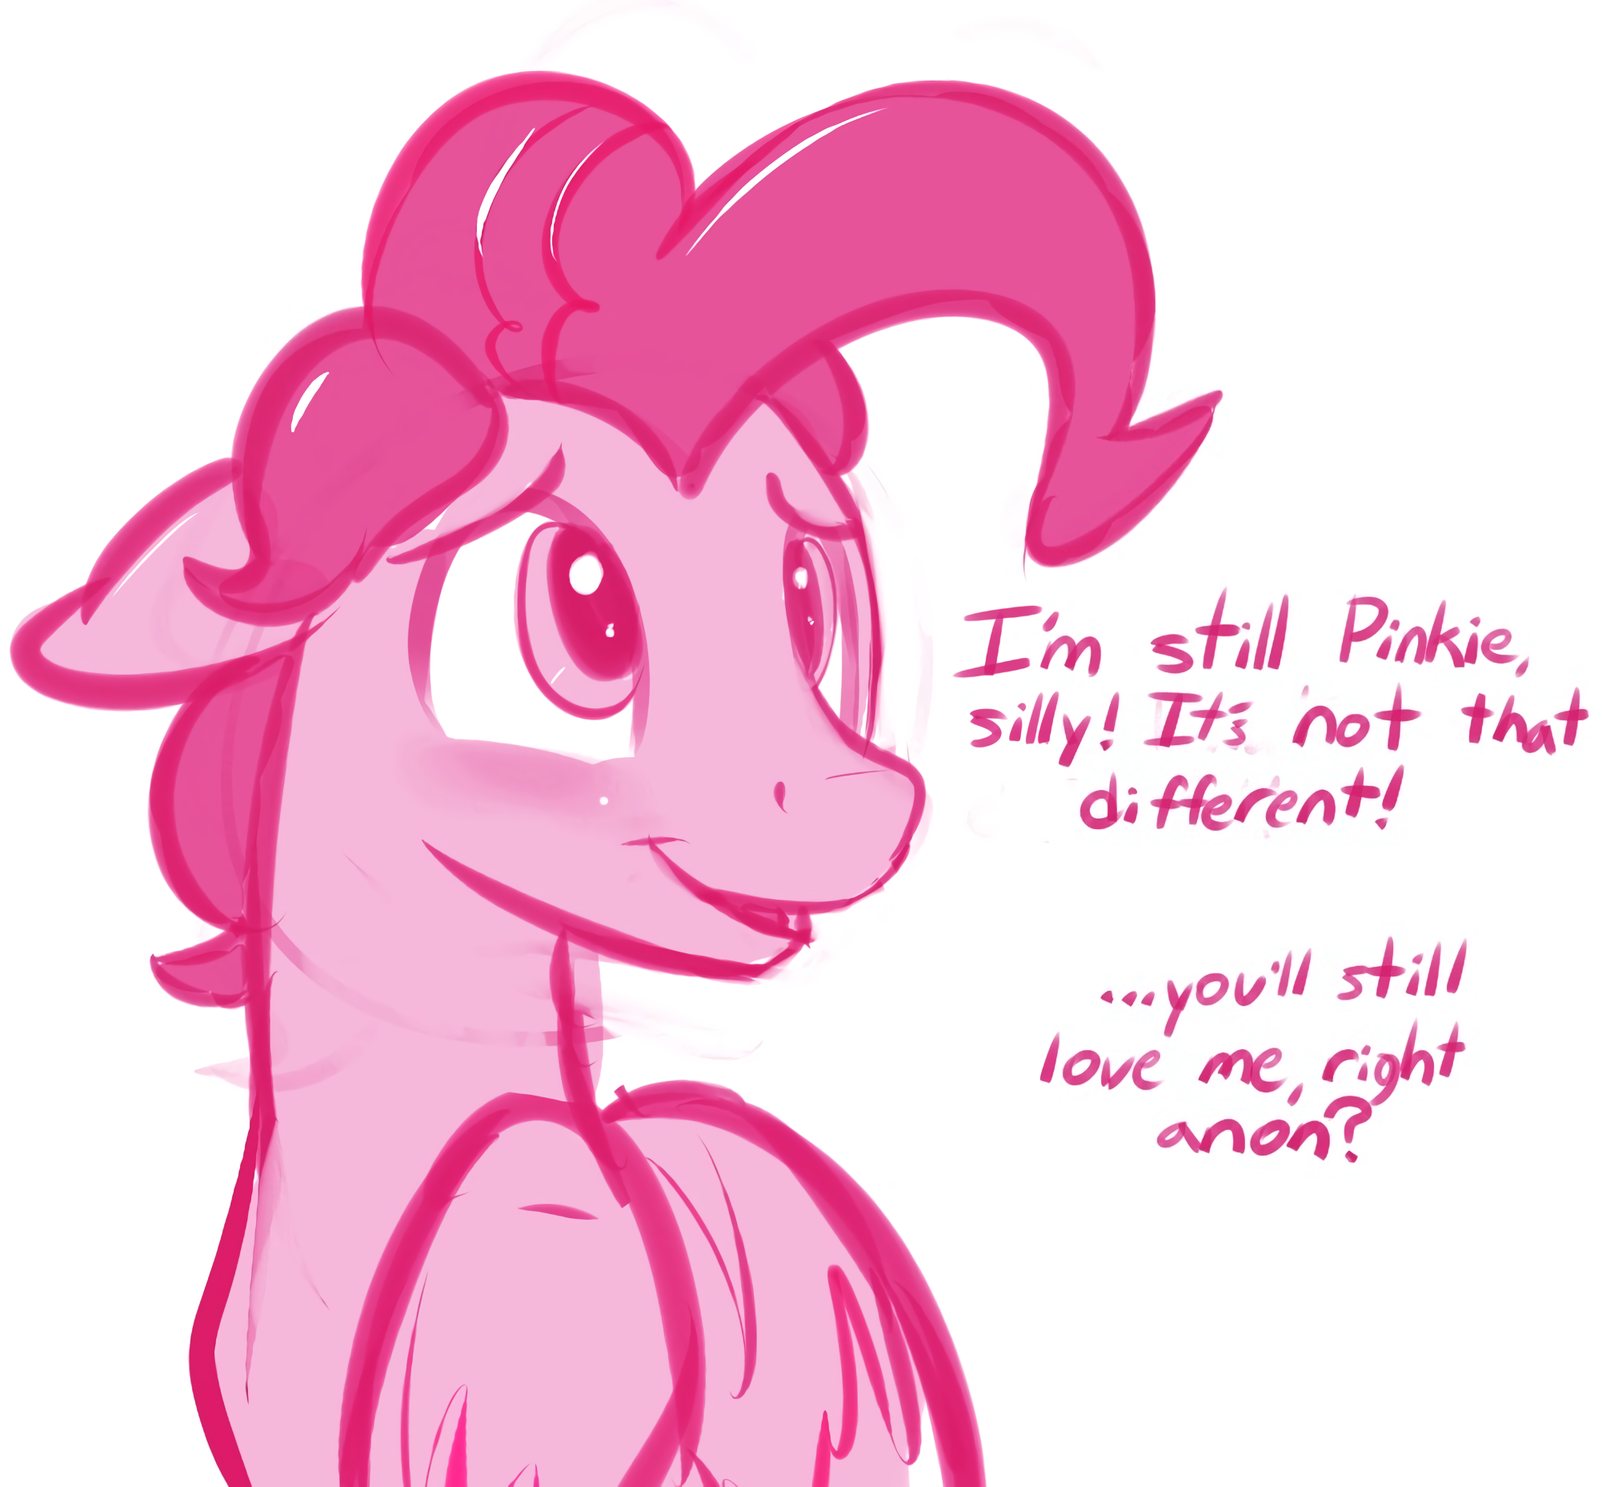 Would you? - My little pony, Pinkie pie, Rule 63, , No homo, Braeburned